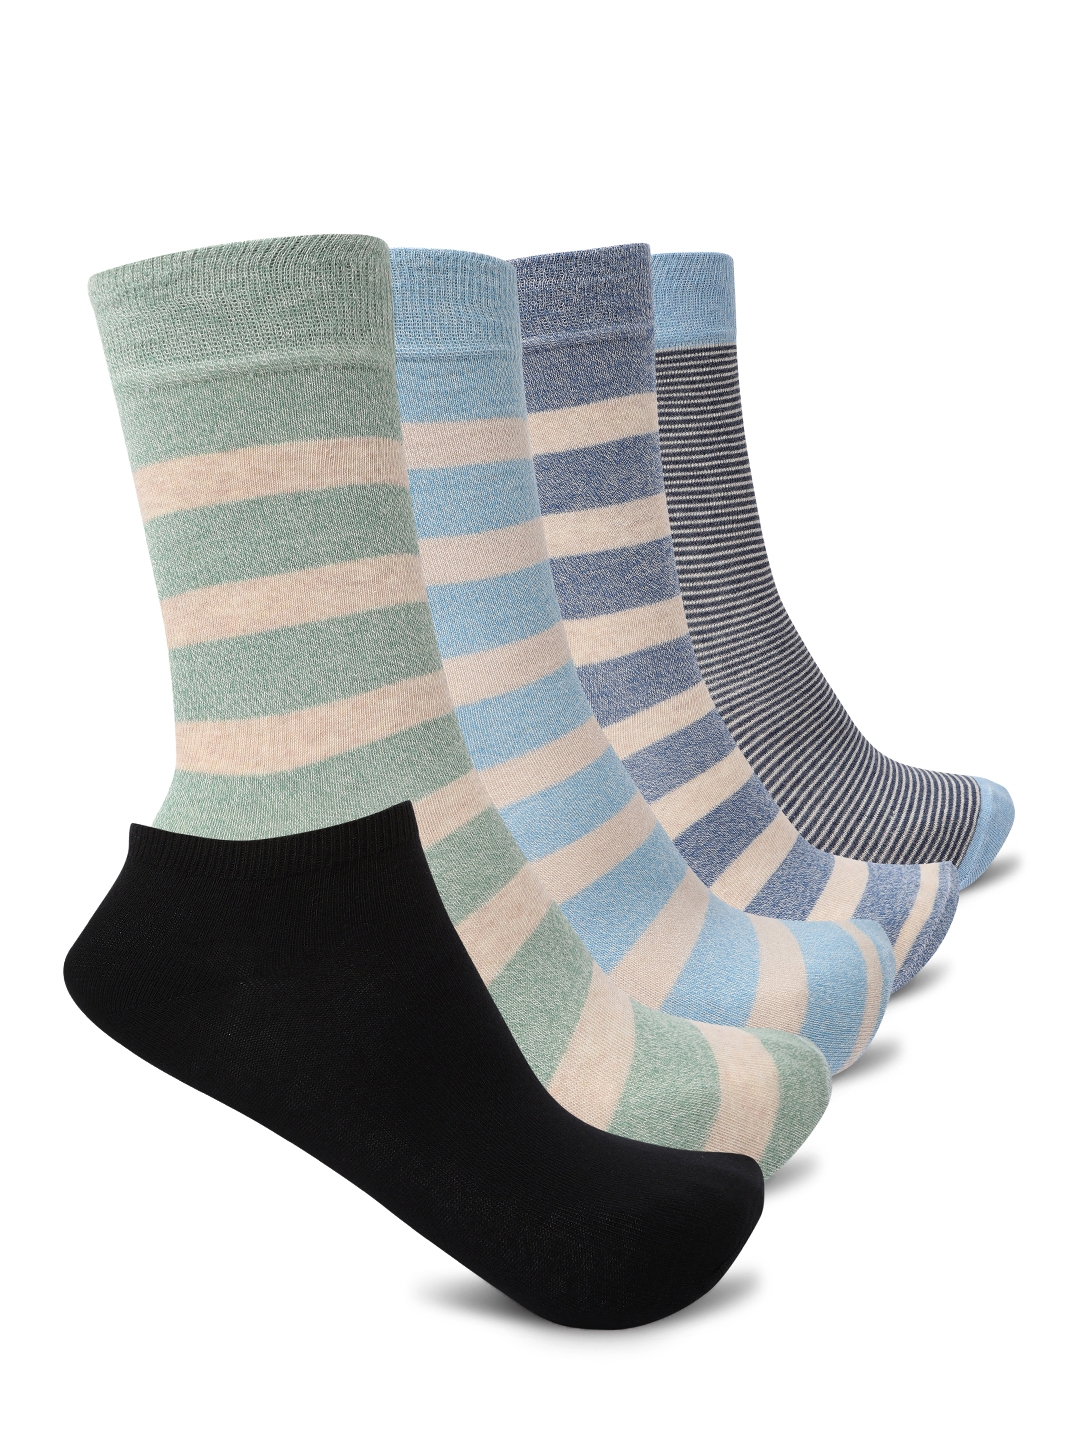 Smarty Pants | Smarty Pants men's pack of 5 solid and printed cotton socks. 